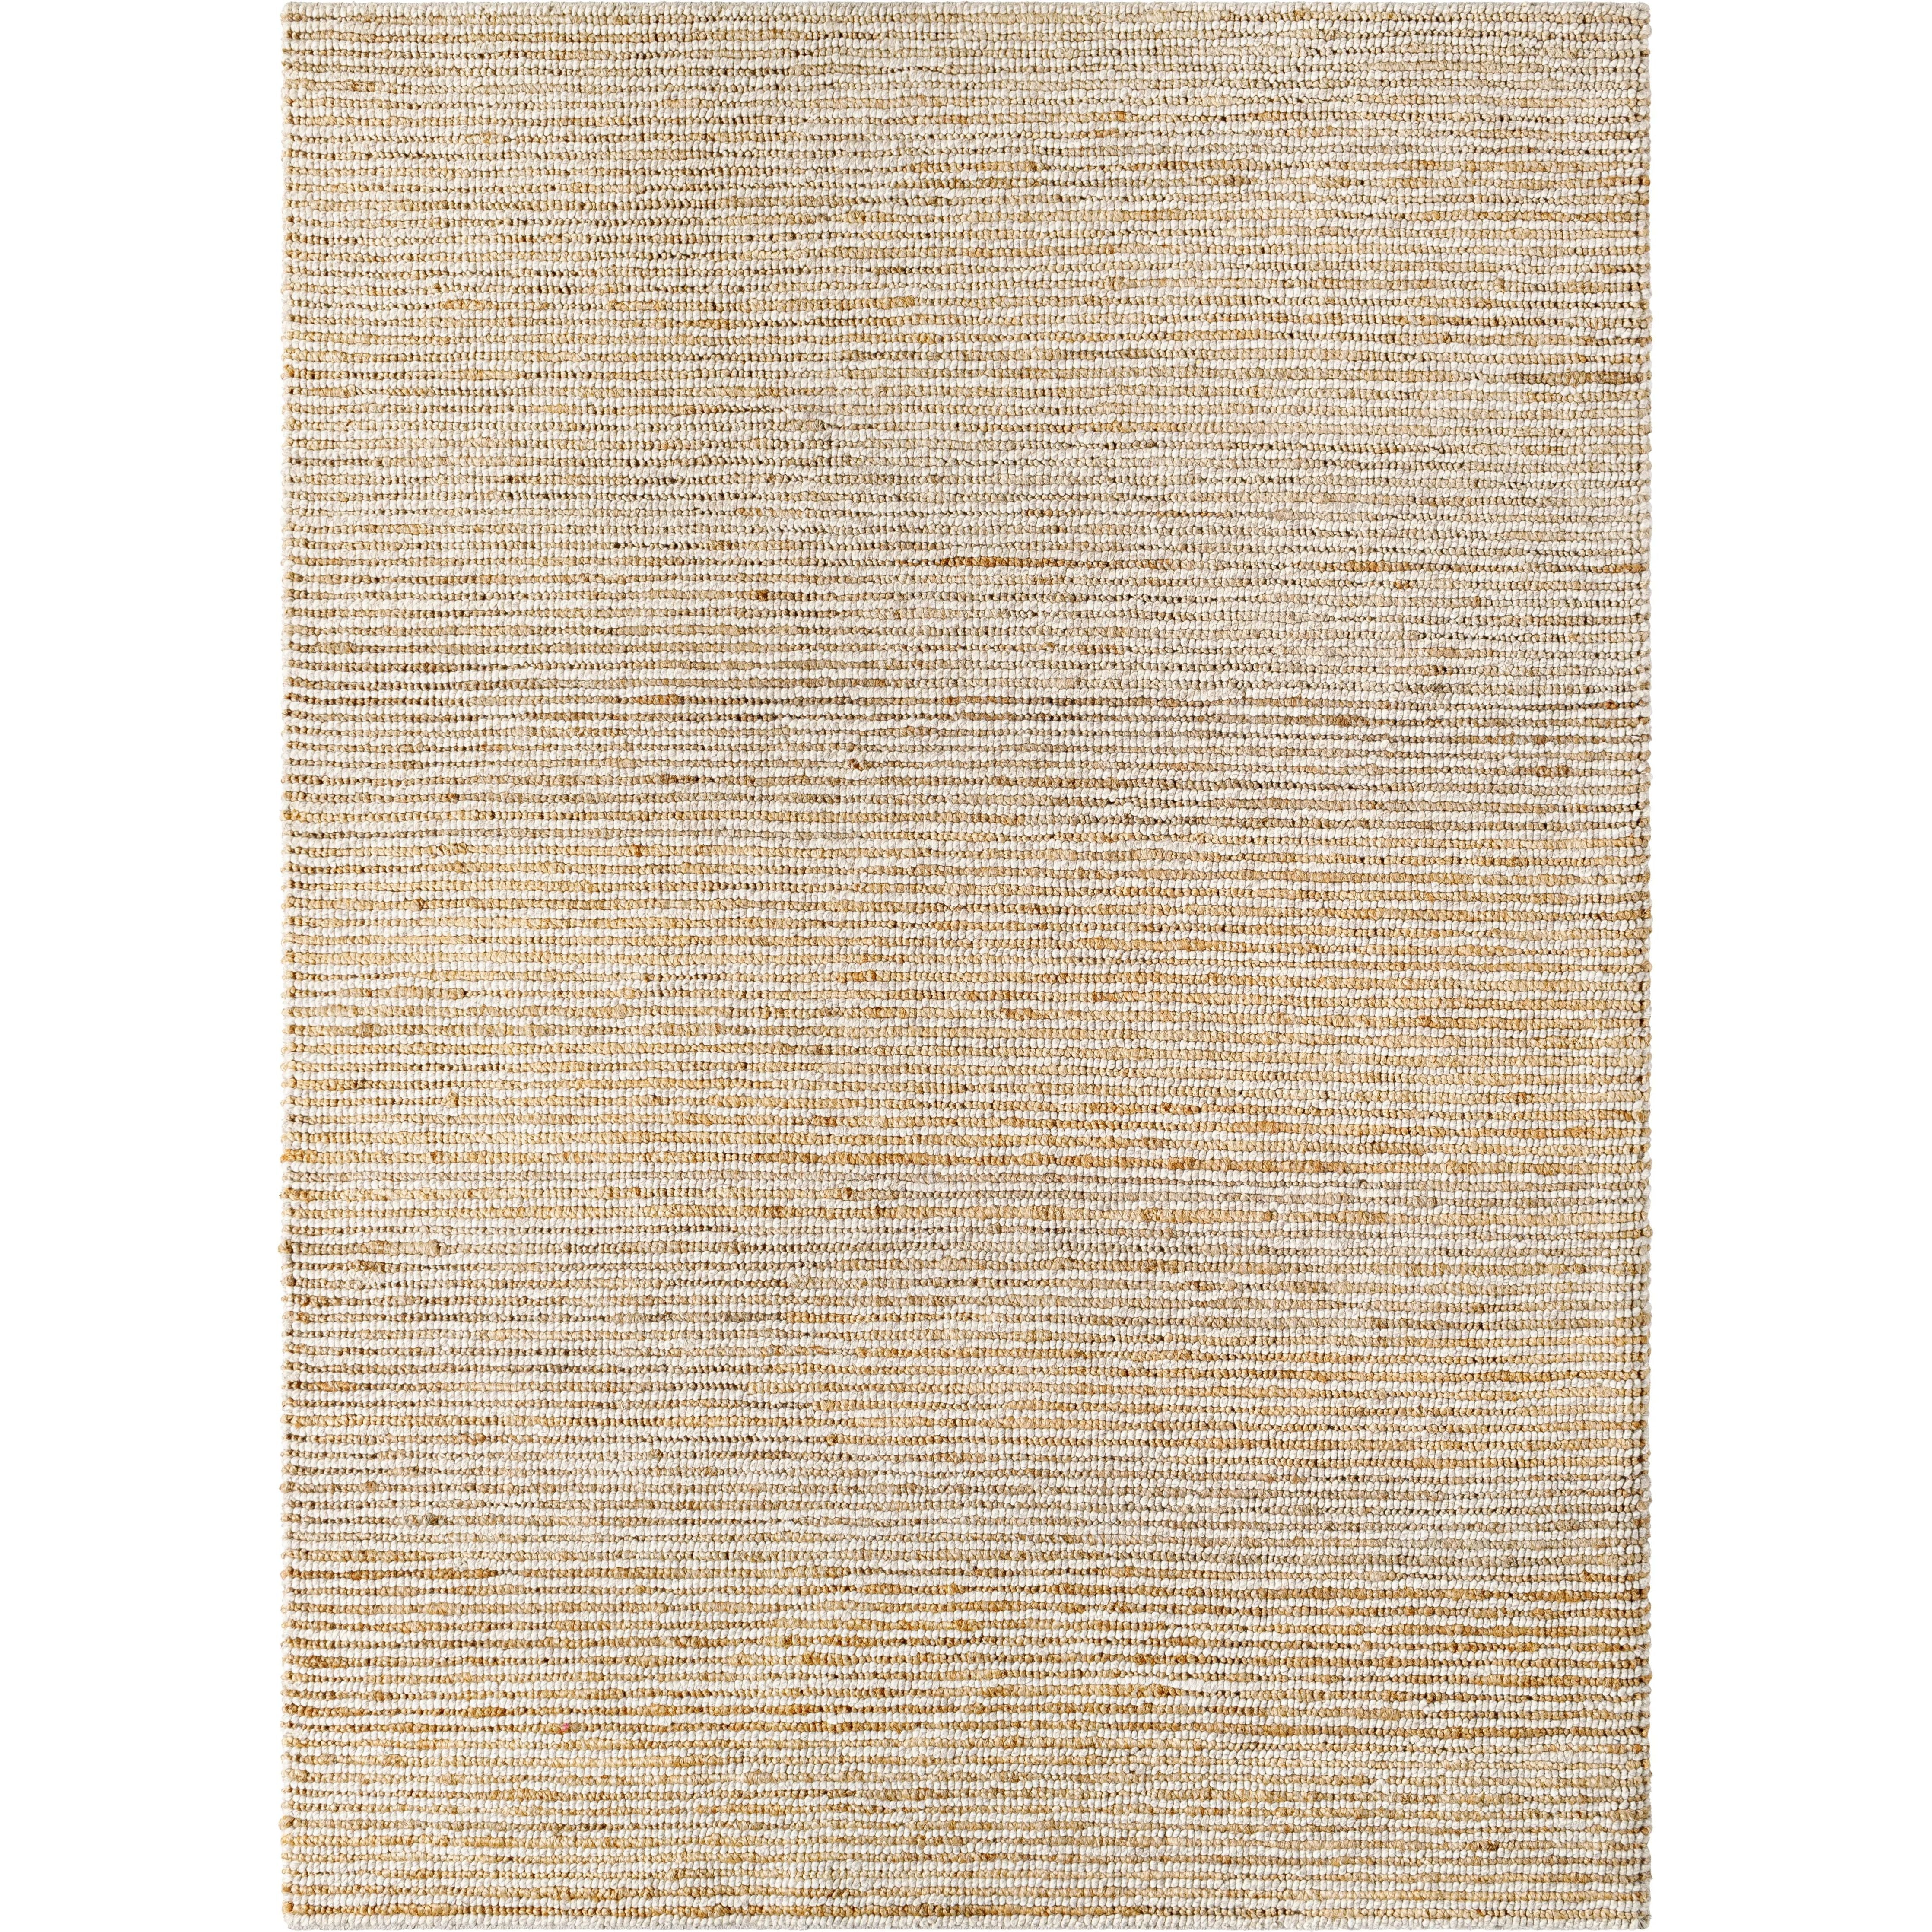 This Molly area rug offers a modern style to any room. It is hand-woven from Wool and Jute, making it durable and long lasting. The no-pile construction ensures that the rug will not flatten over time. This beautiful area rug is made in India, and it is recommended to use with a rug pad for extra cushioning and stability. Amethyst Home provides interior design, new home construction design consulting, vintage area rugs, and lighting in the Alpharetta metro area.